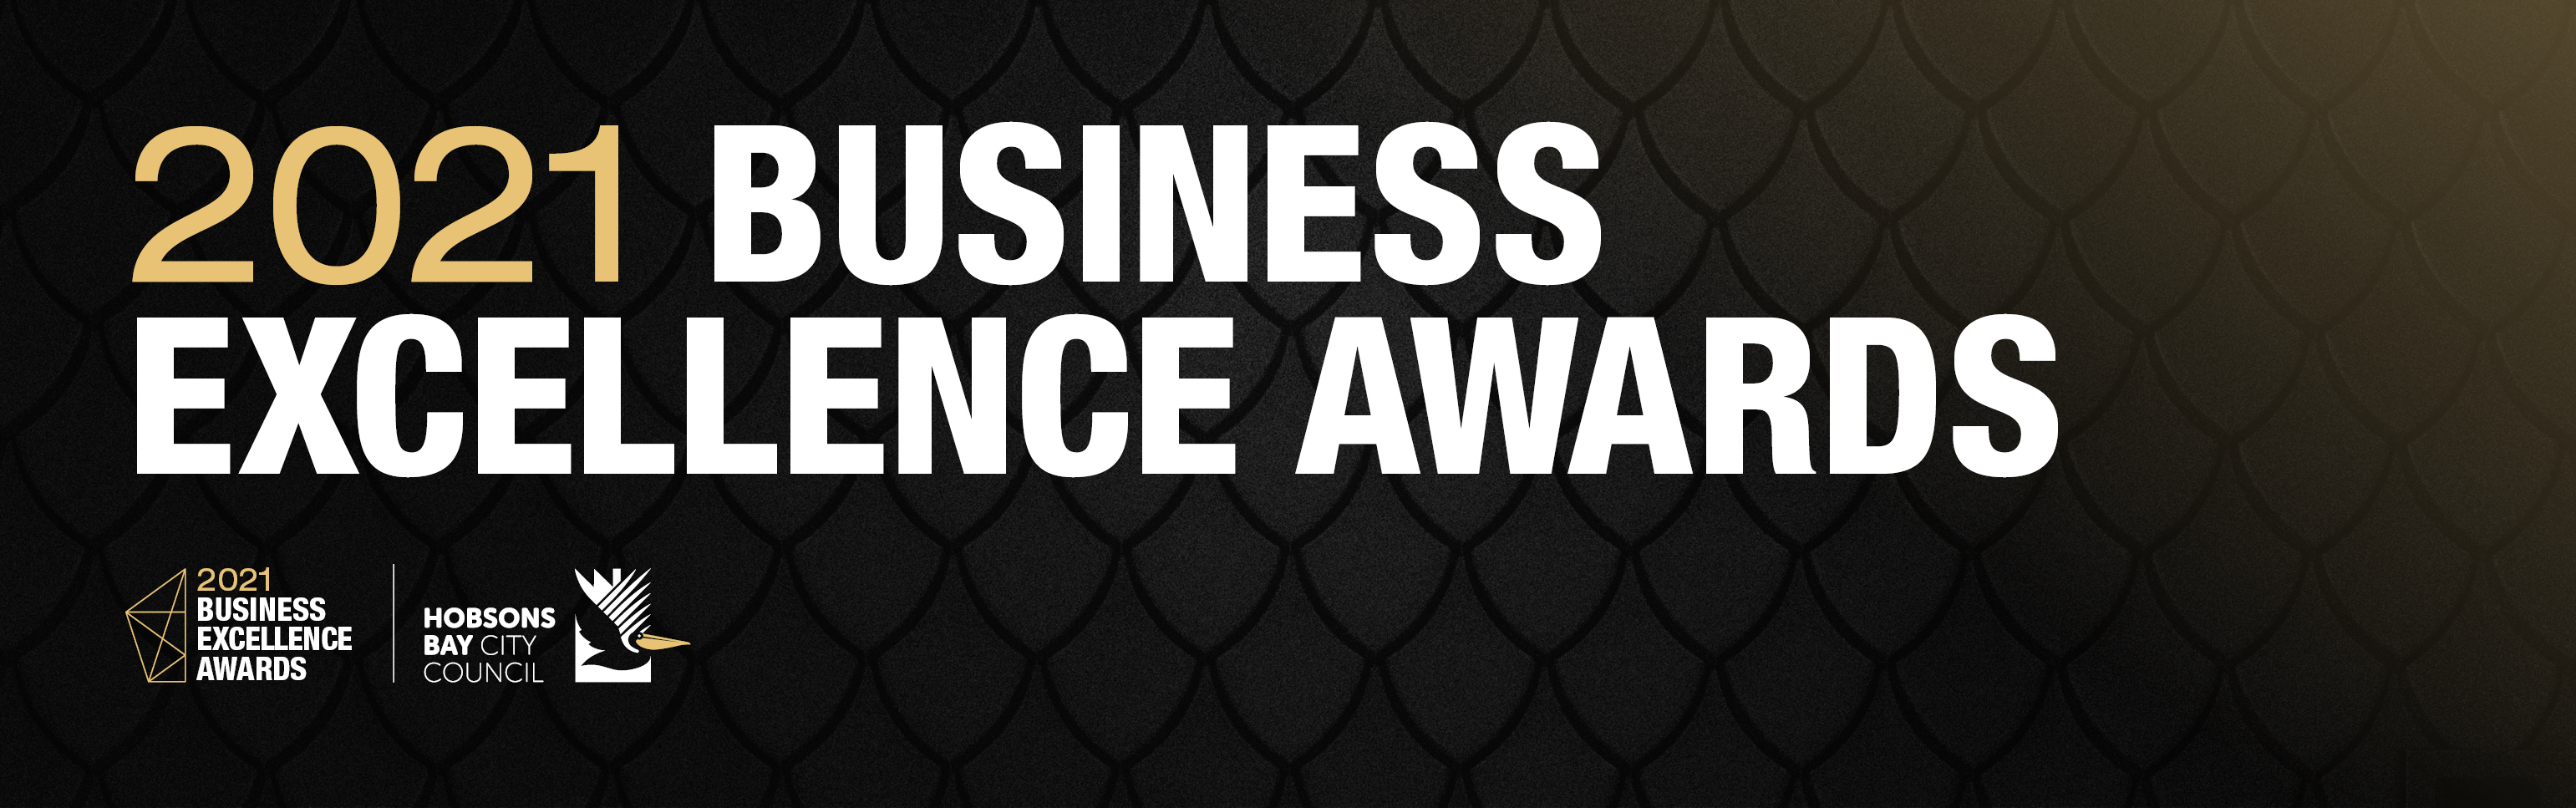 Business Excellence Awards 2021 Banner